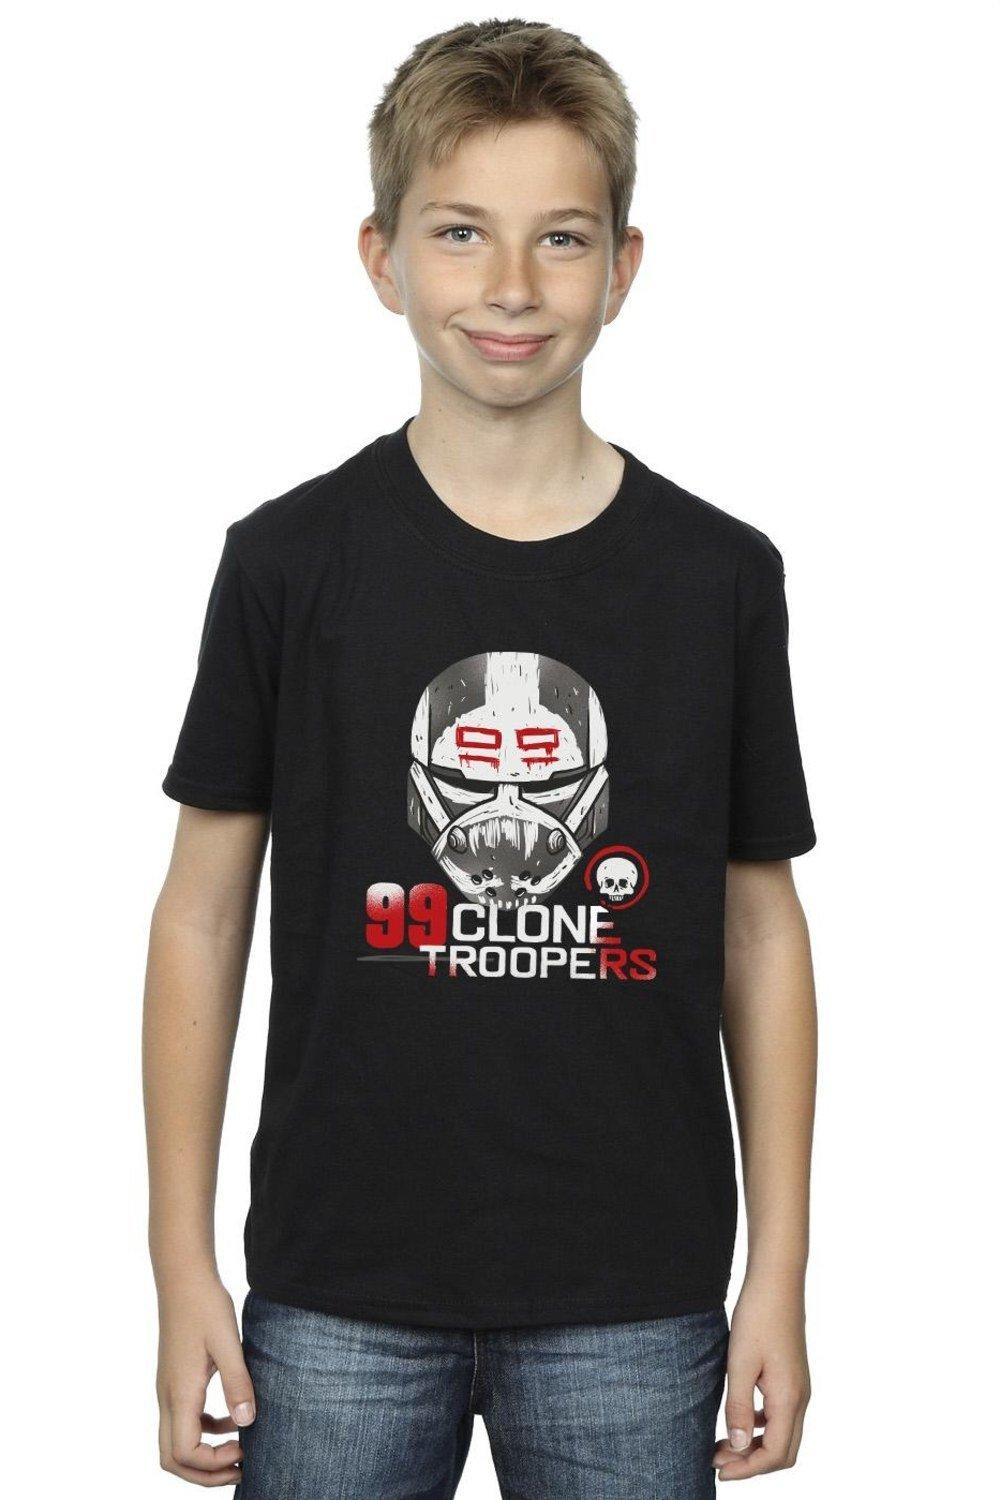 The Bad Batch 99 Clone Troopers T-Shirt